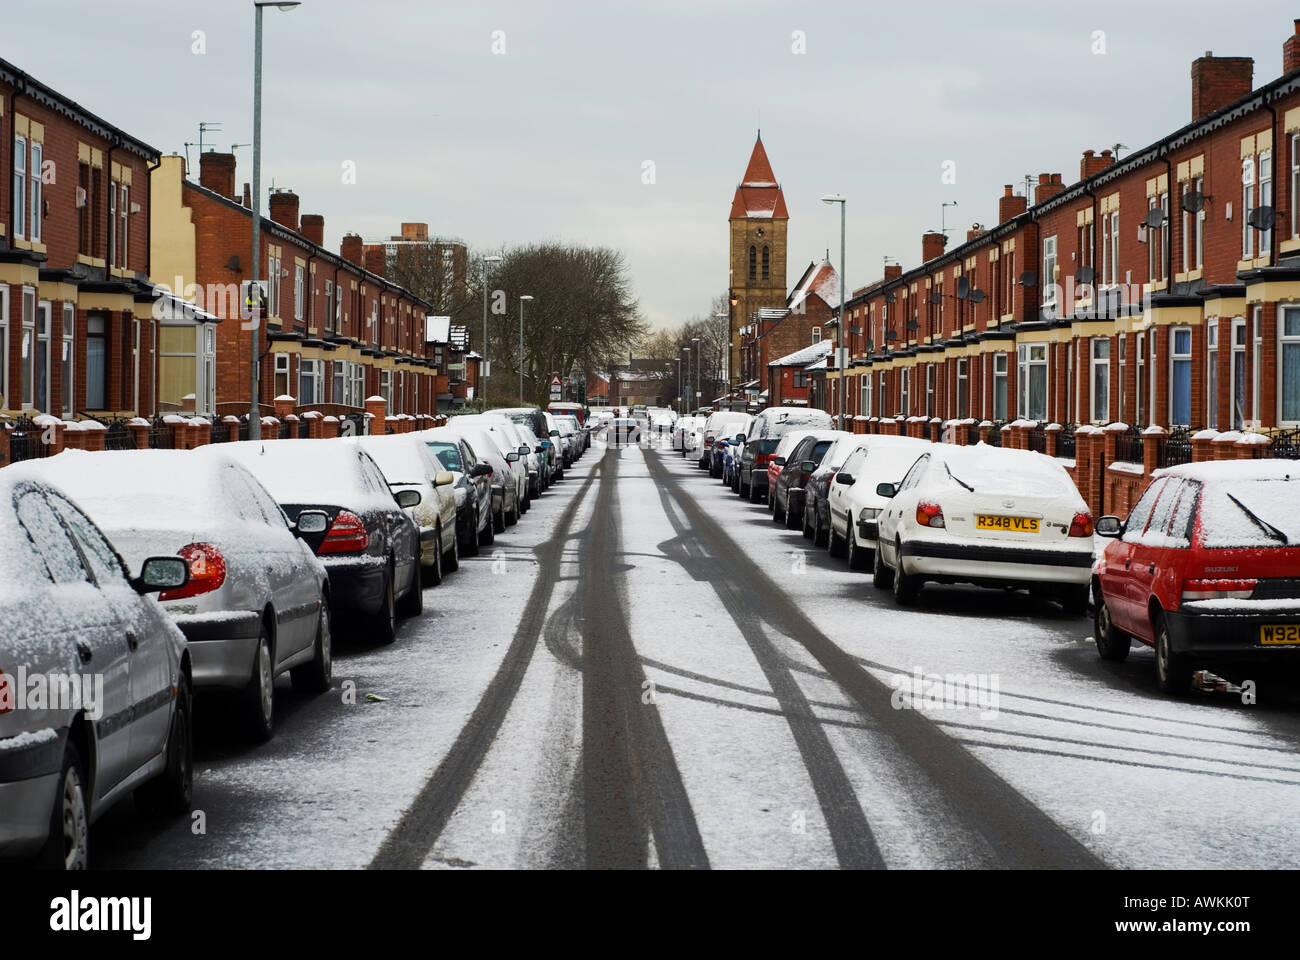 Snow covering street and cars in Huxley Ave Manchester UK Stock Photo